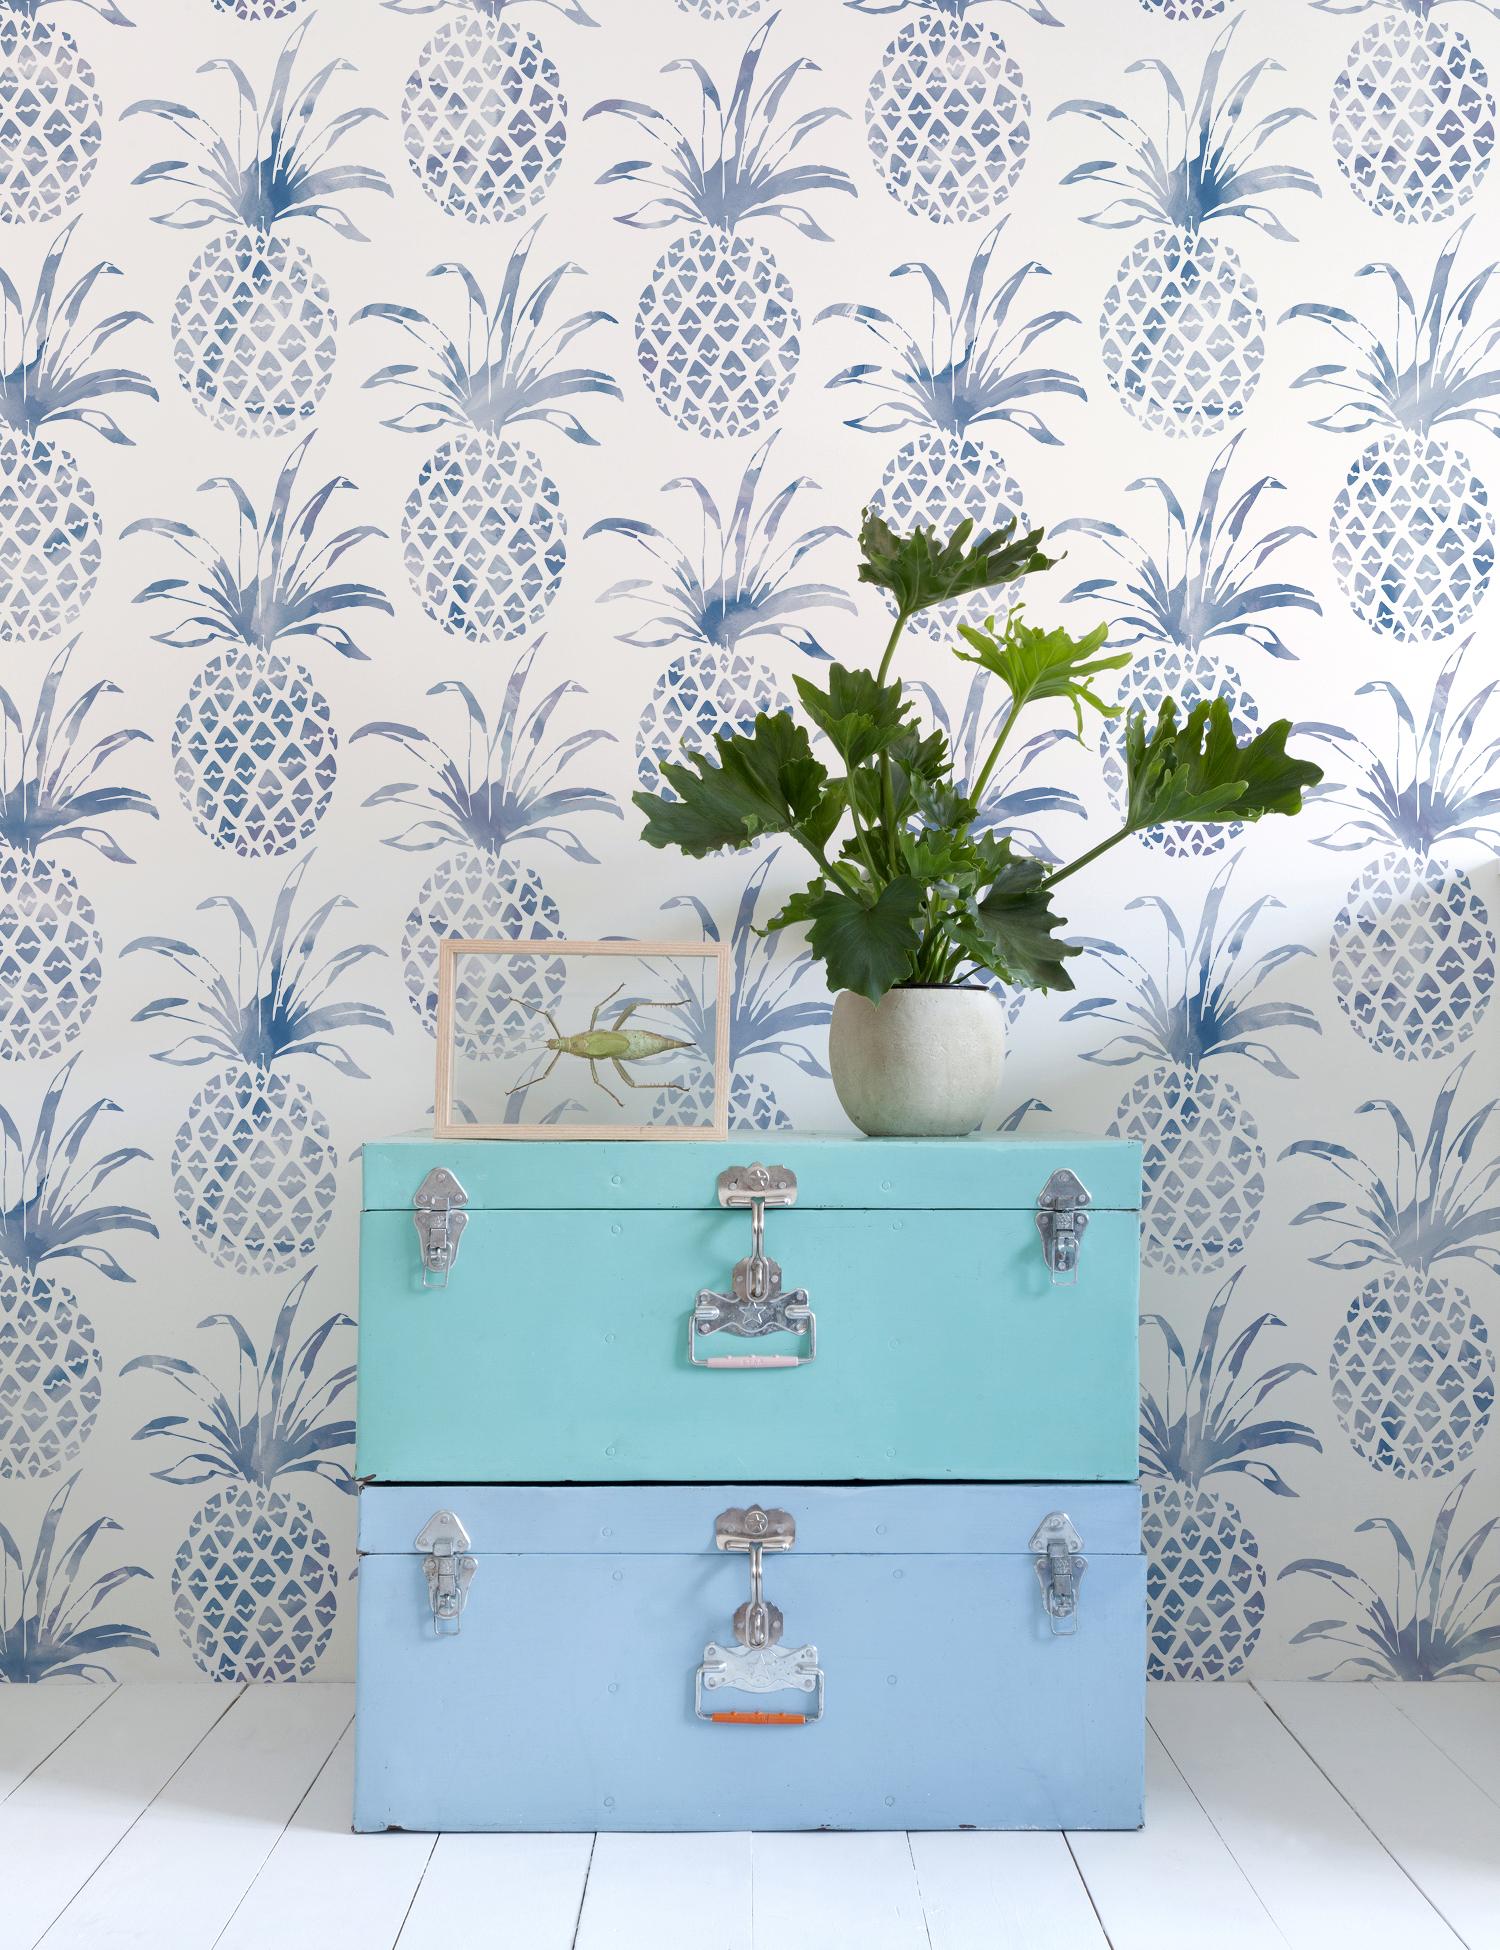 The tropical feeling of Piña Pintada wallpaper is sure to remind you of the islands, all year long.

Printing: Digital pigment print (minimum order of 4 rolls). 
Material: FSC-certified paper. 
Trimming: This product may come pre-trimmed or